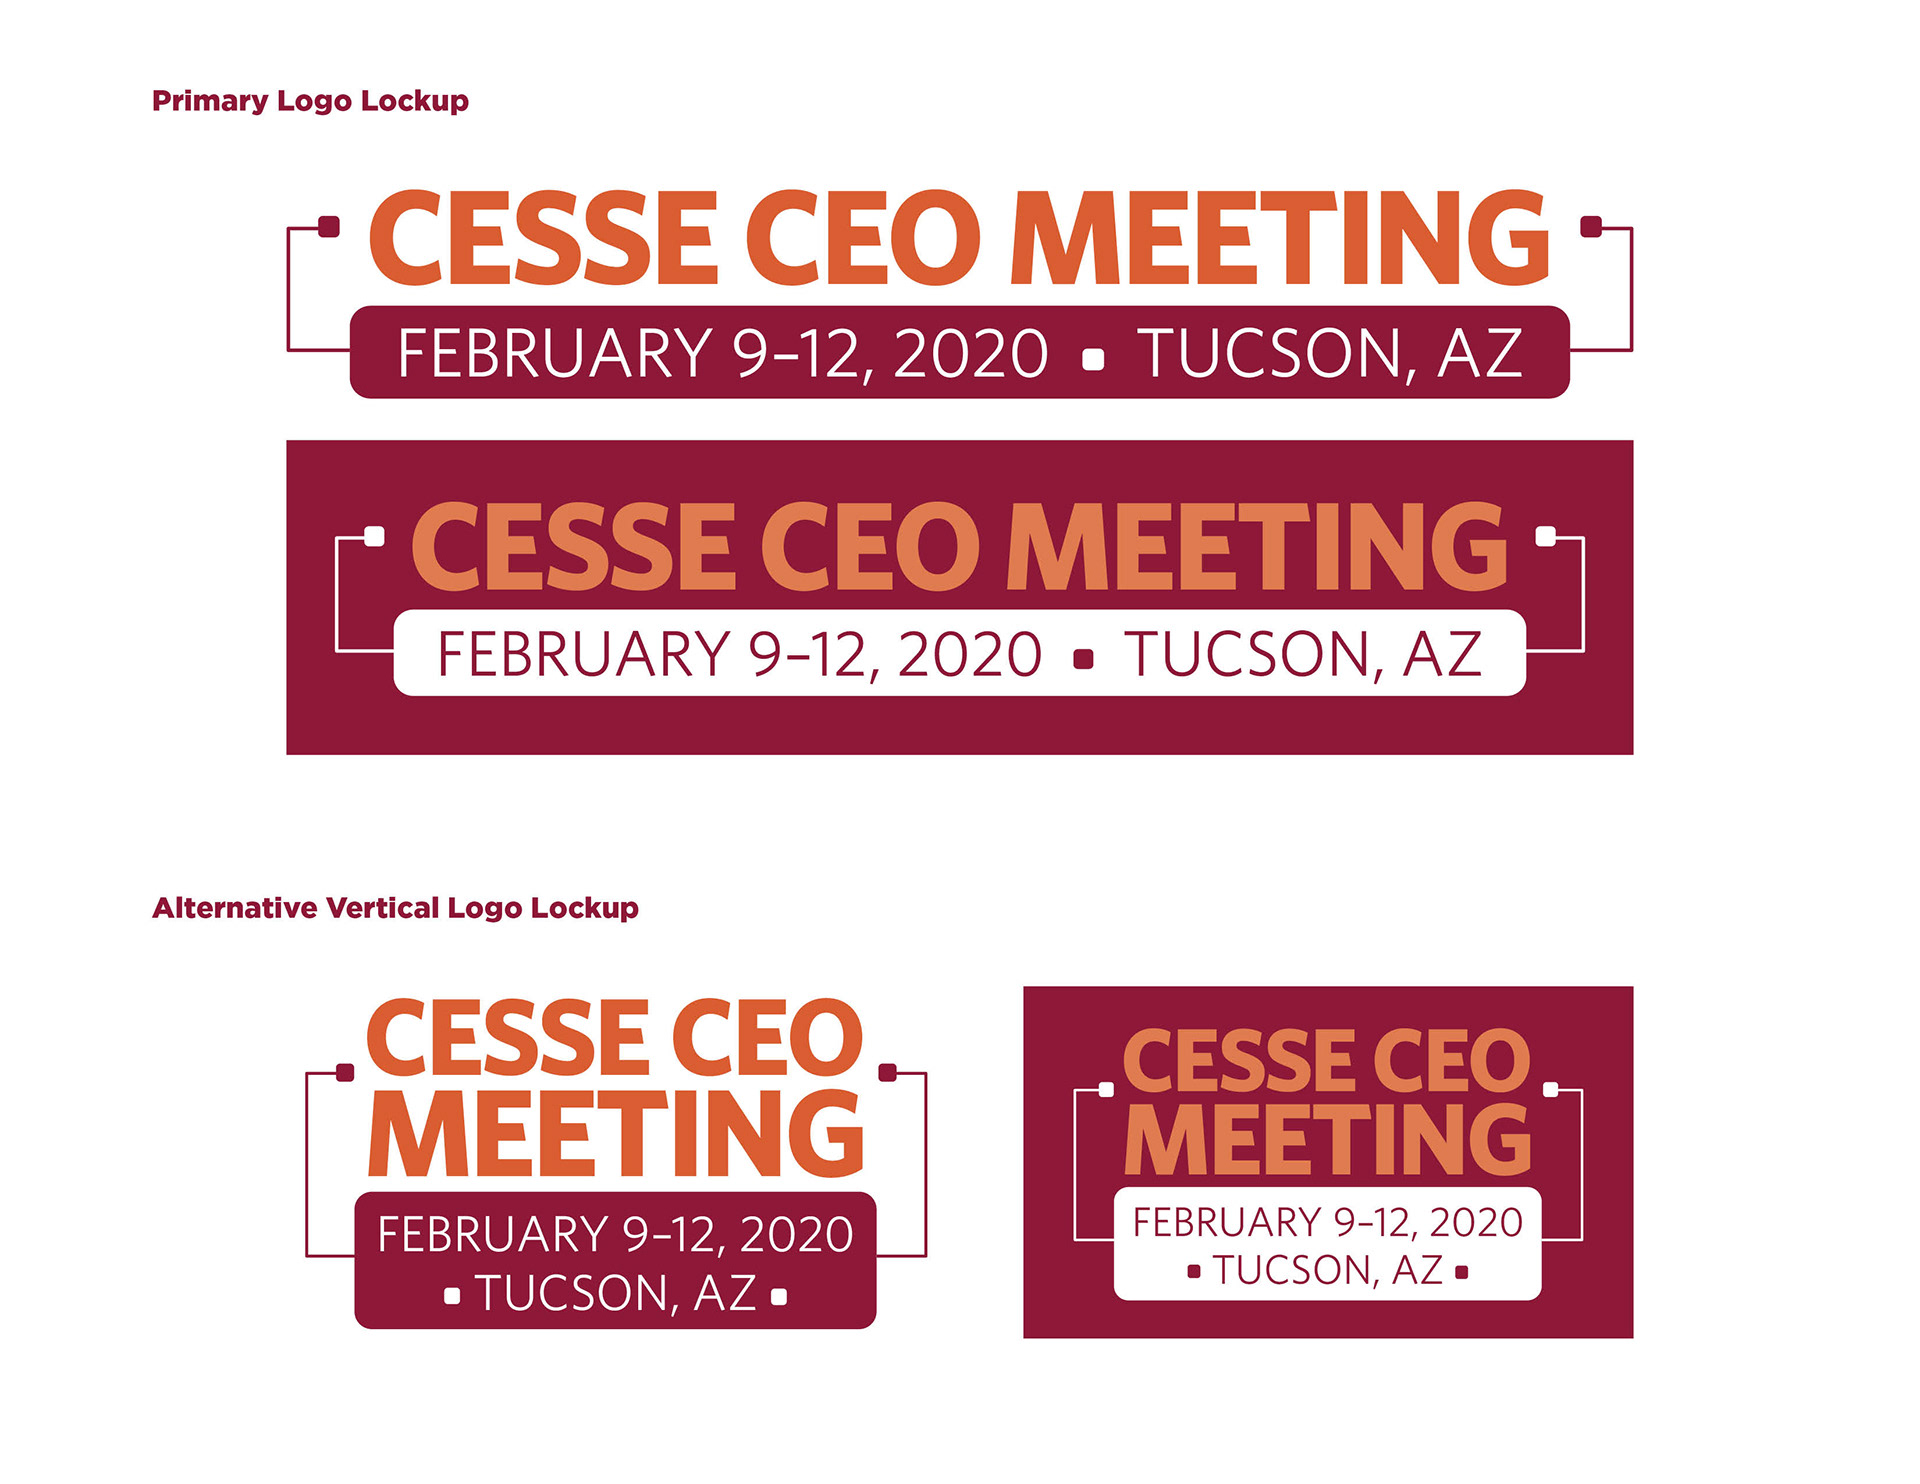 CESSE CEO Meeting